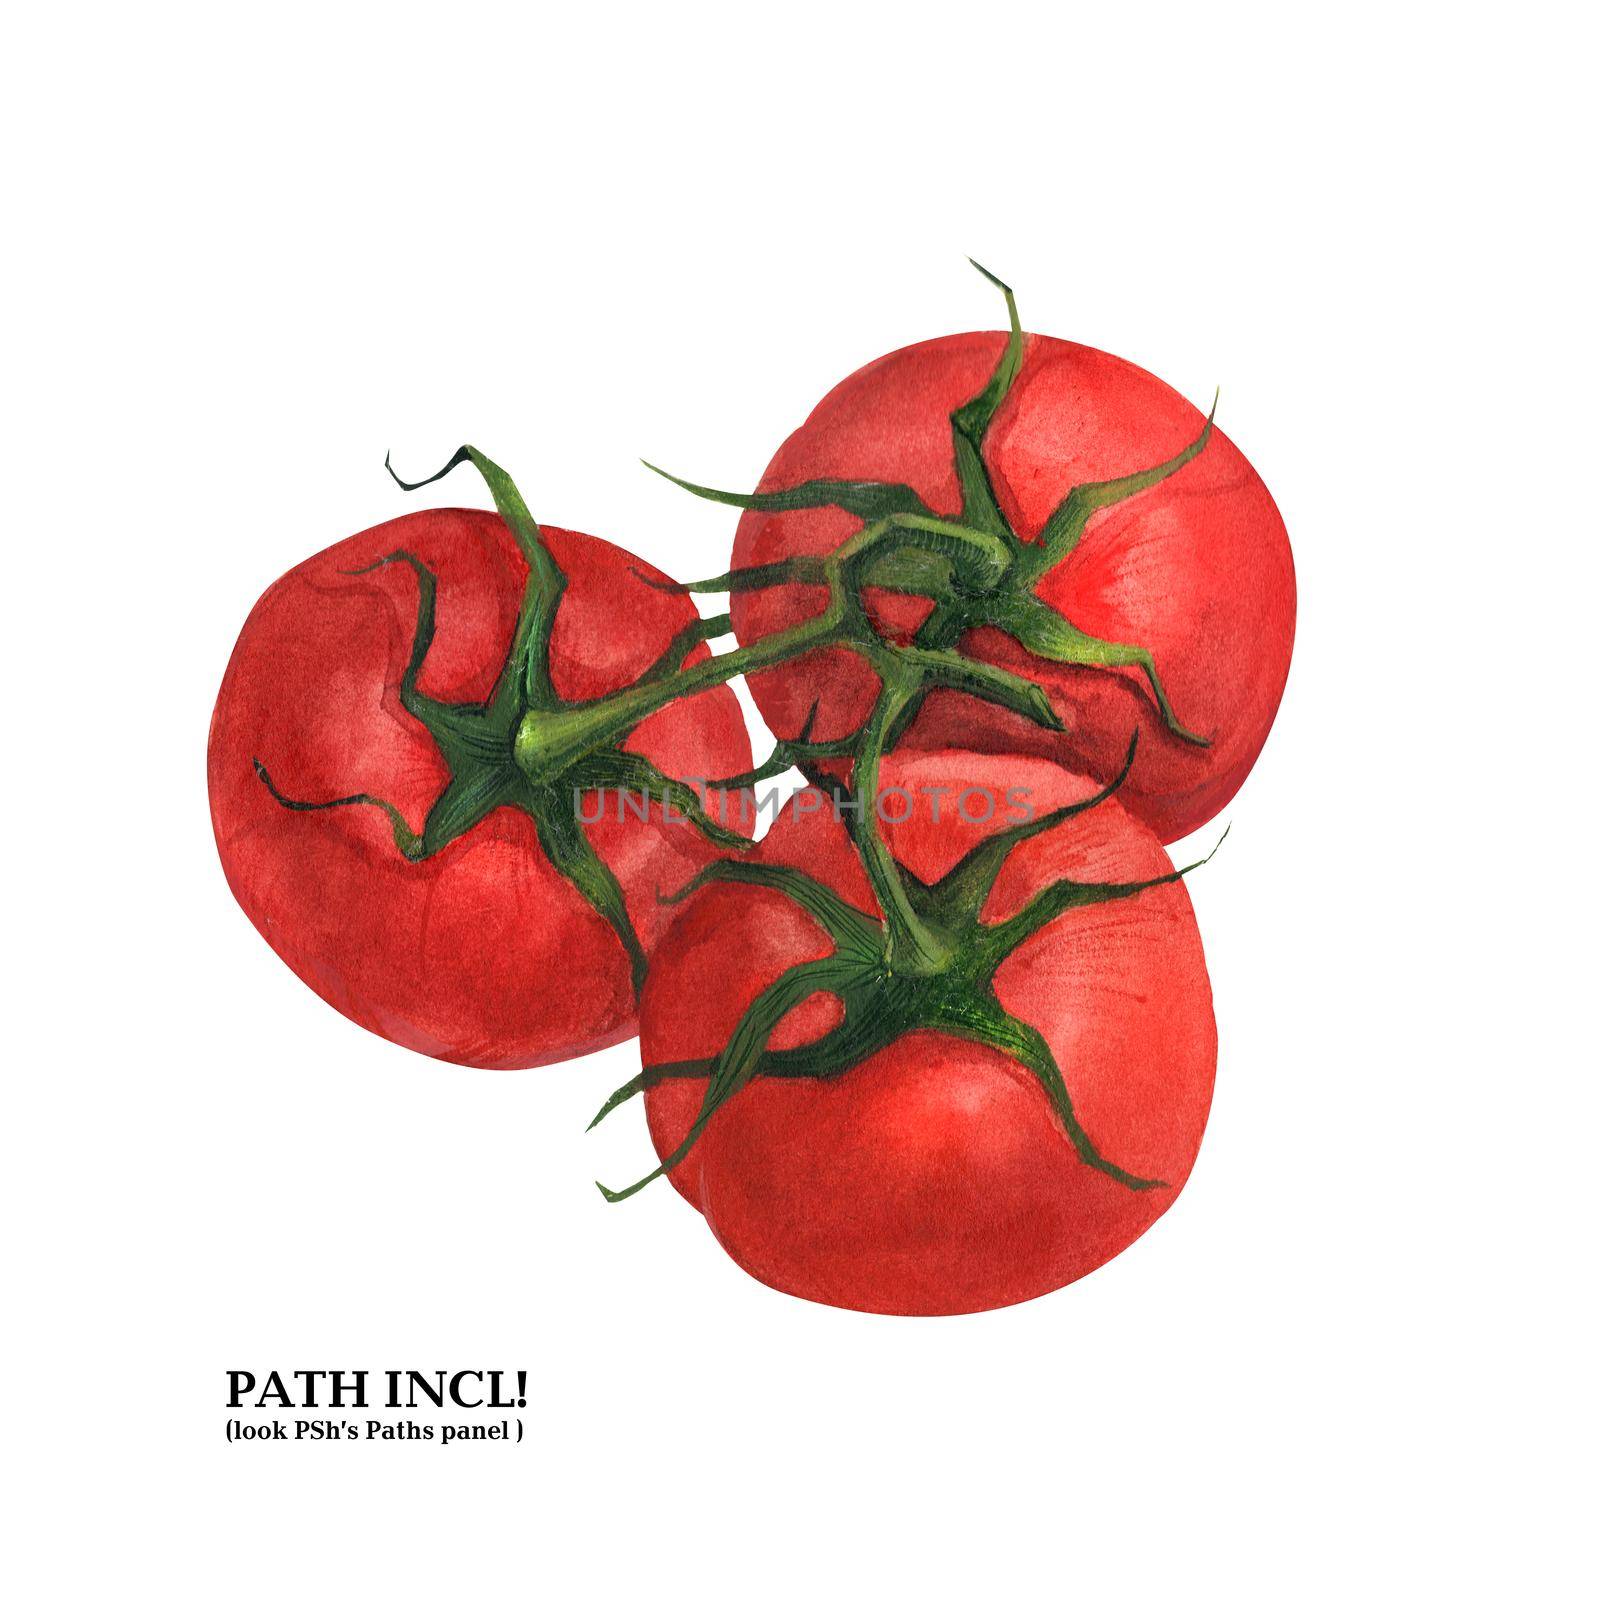 Botanical watercolor tomatoes by Xeniasnowstorm